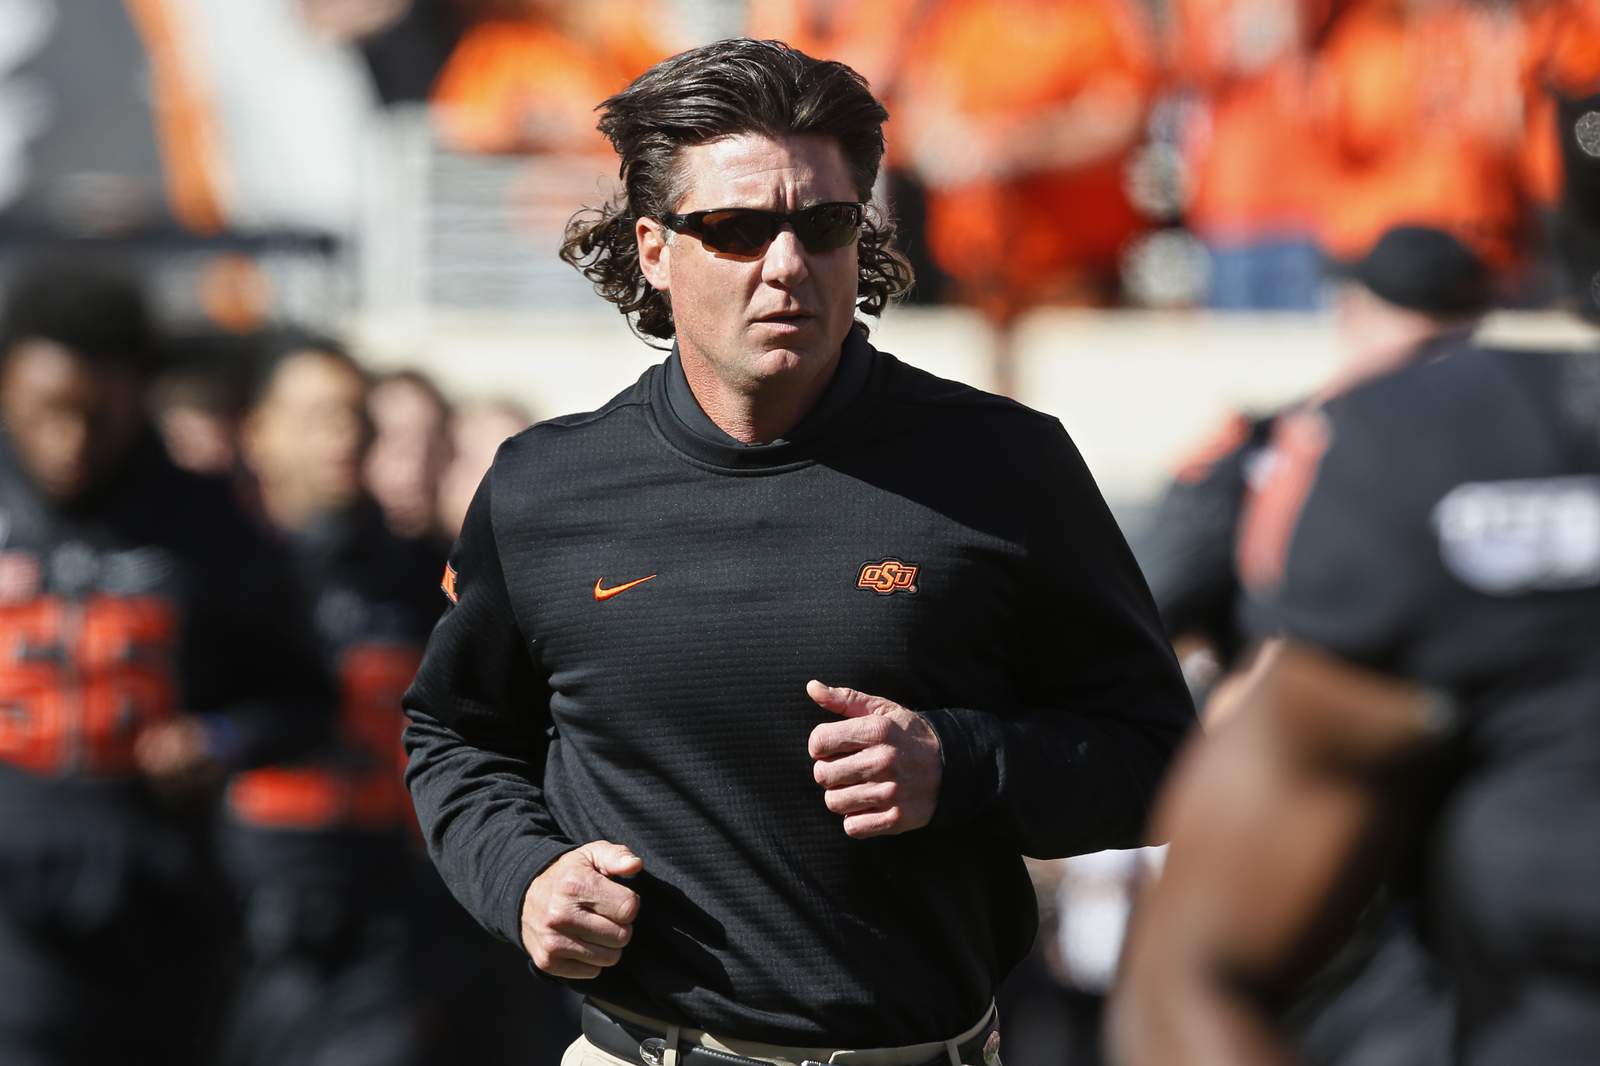 Oklahoma St. coach Gundy apologizes for wearing OAN T-shirt